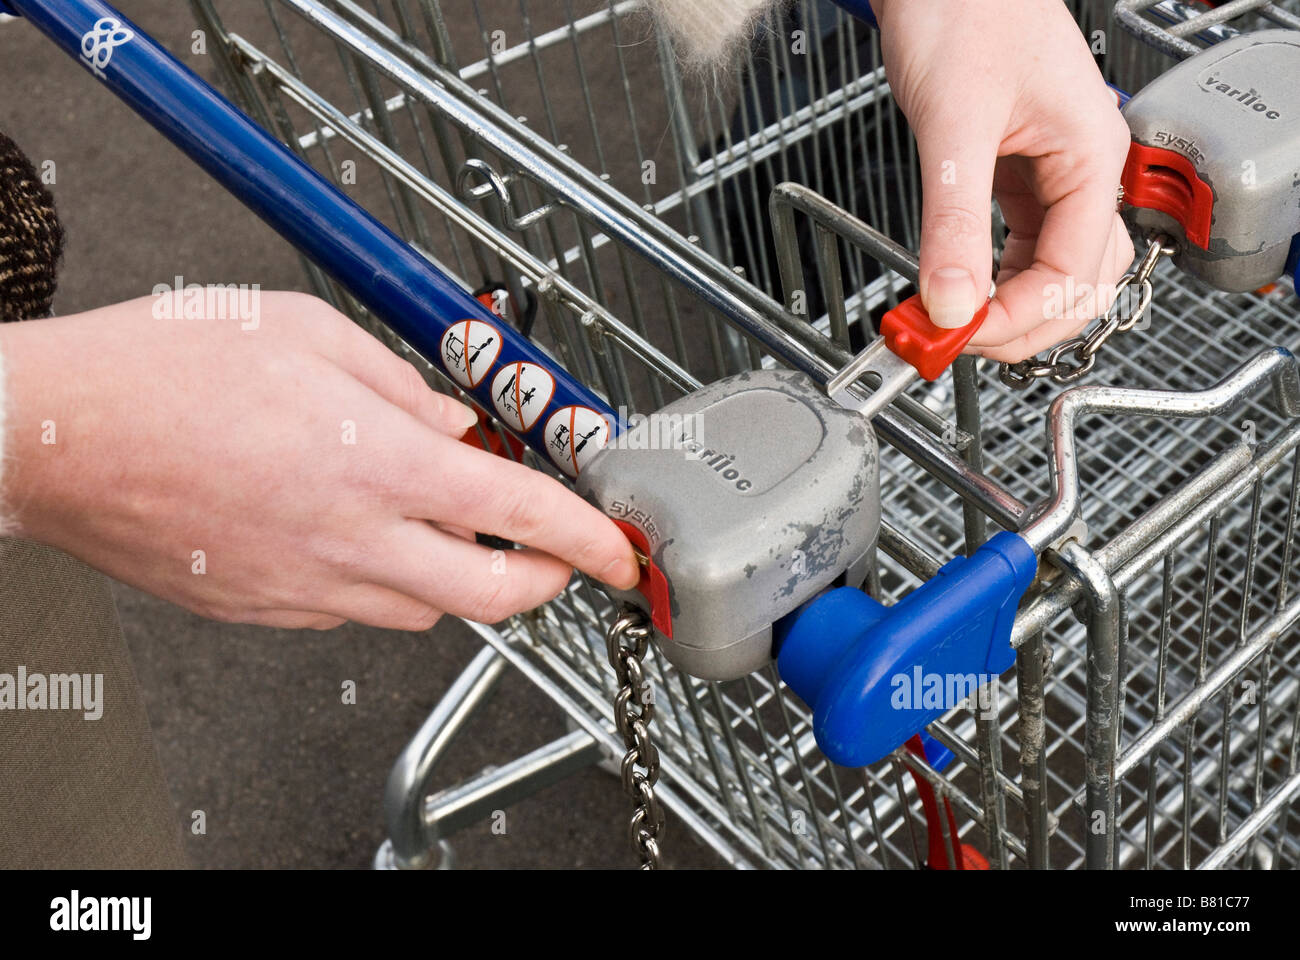 Inserting Coin to release a Supermarket Trolley Stock Photo - Alamy